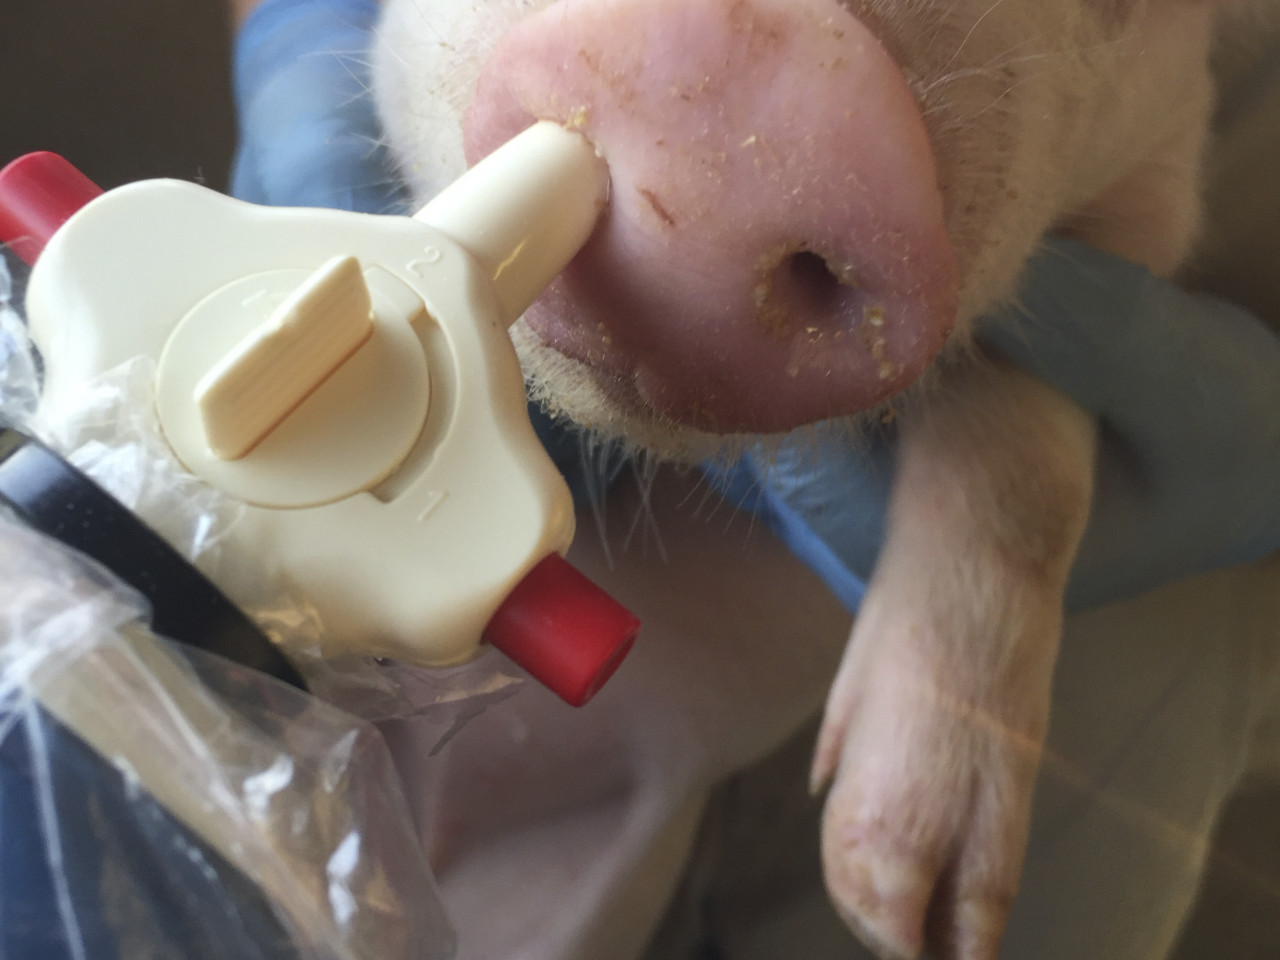 Nasal administration in piglets of the dry powder loaded with the antigen and the nanoemulsion adjuvant